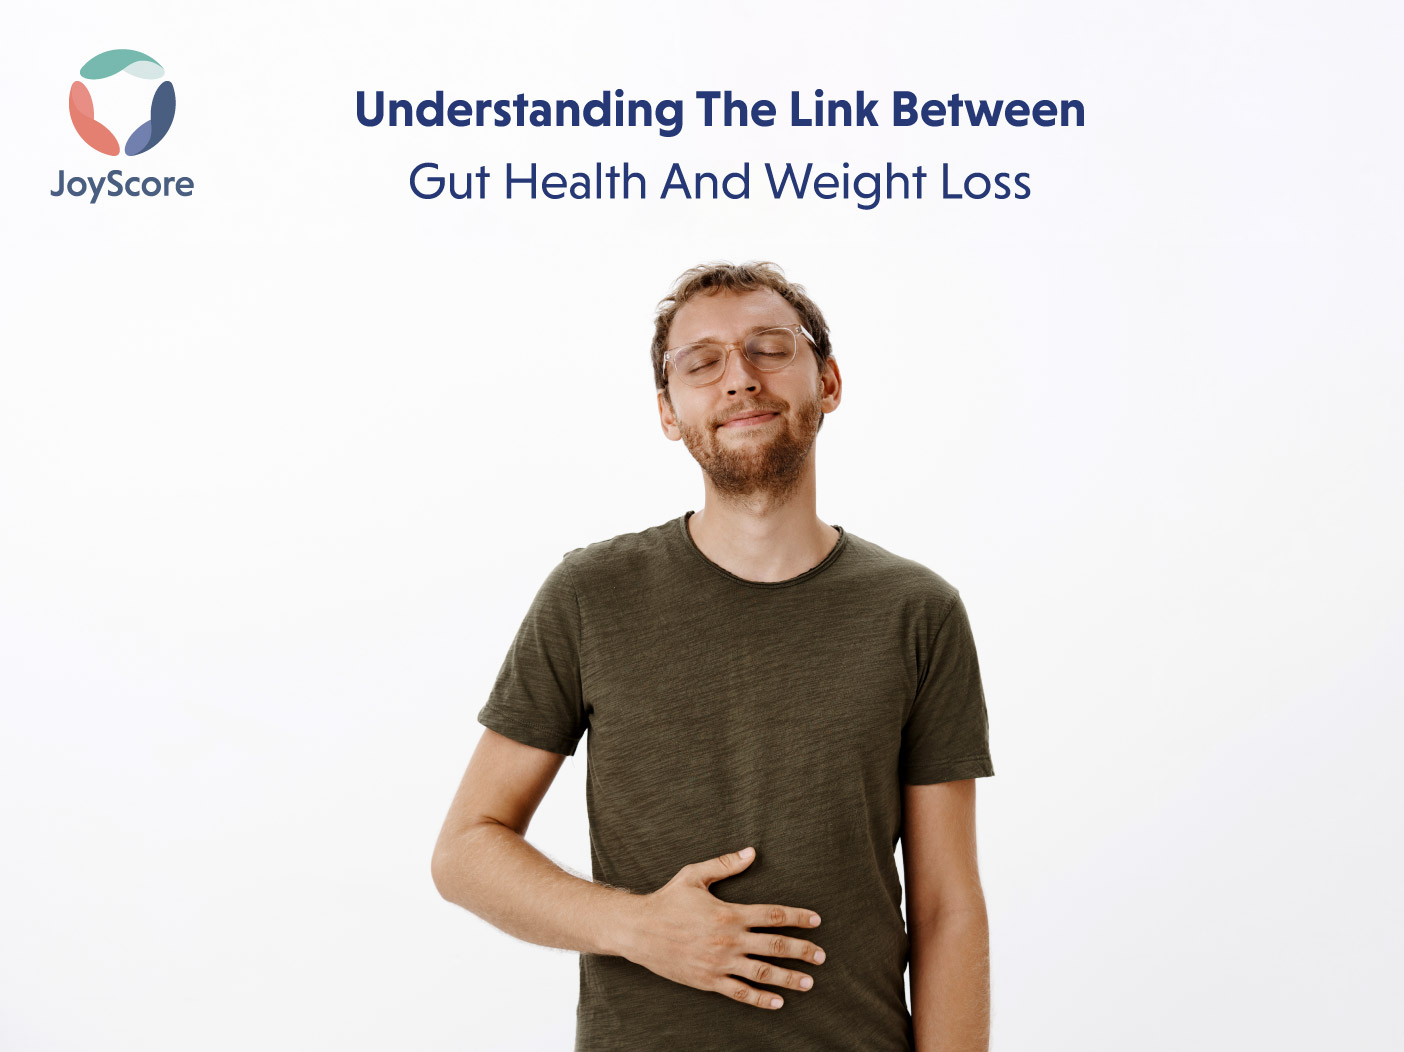 THE LINK BETWEEN GUT HEALTH AND WEIGHT LOSS